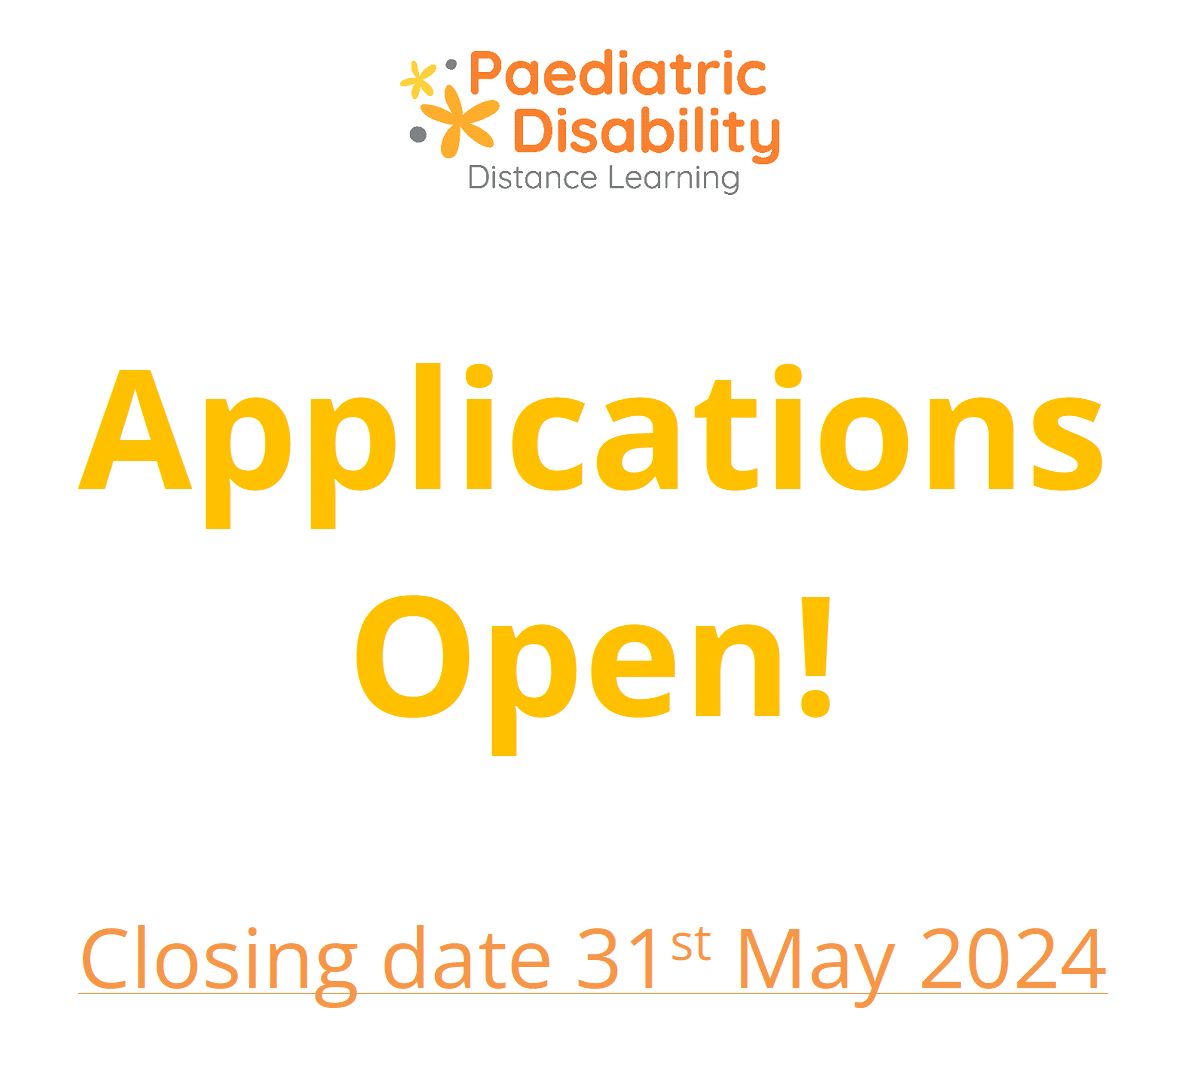 Are you a GRID trainee? In case you missed the news, we now have flexible payment options for GRID trainees applying for the Paediatric Neurodisability Diploma. The course complements the Progress + training programme. Apply now for September 2024. sheffieldchildrens.nhs.uk/about-us/caree…